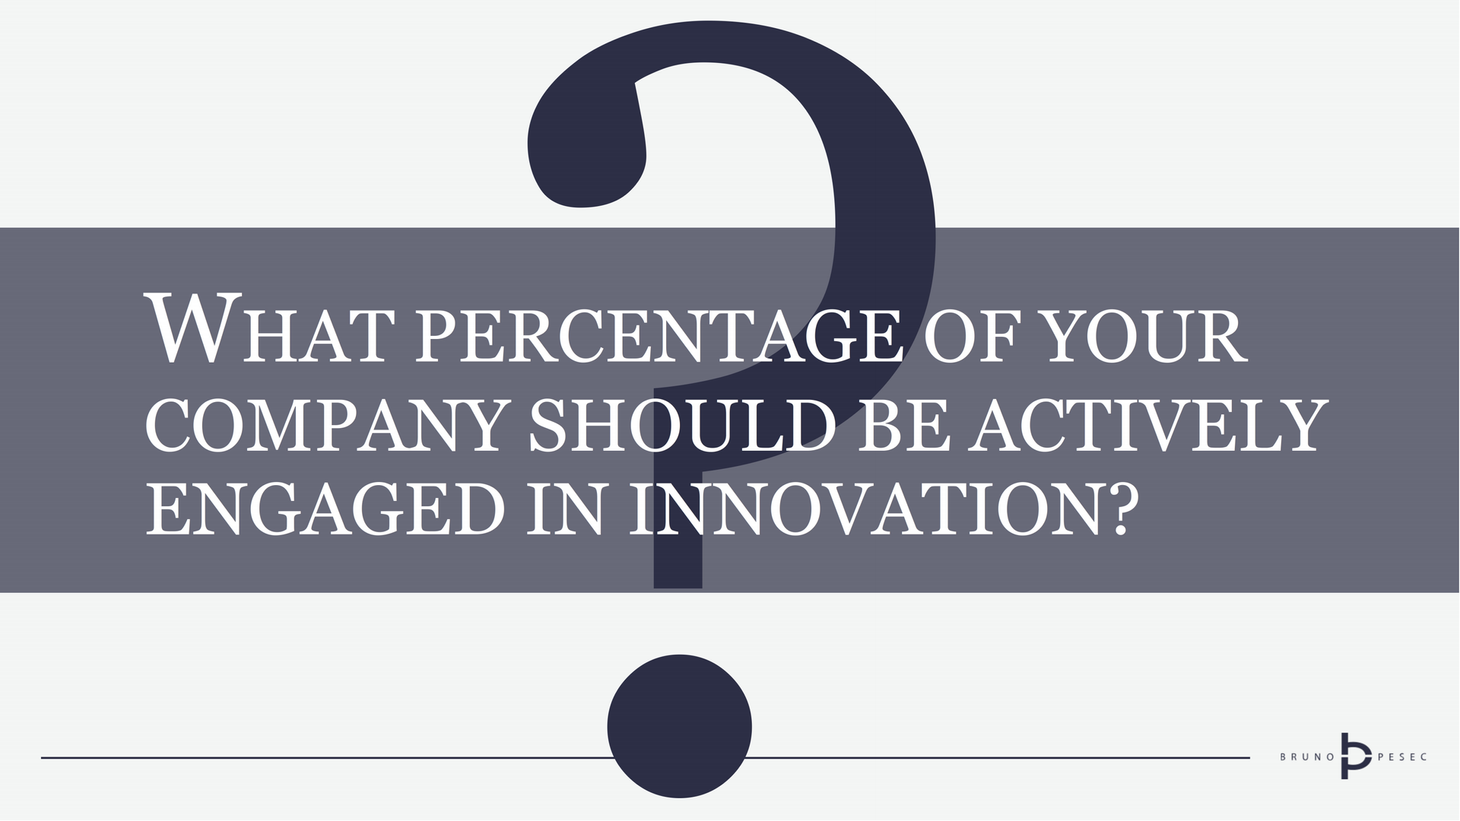 What percentage of your company should be actively engaged in innovation?